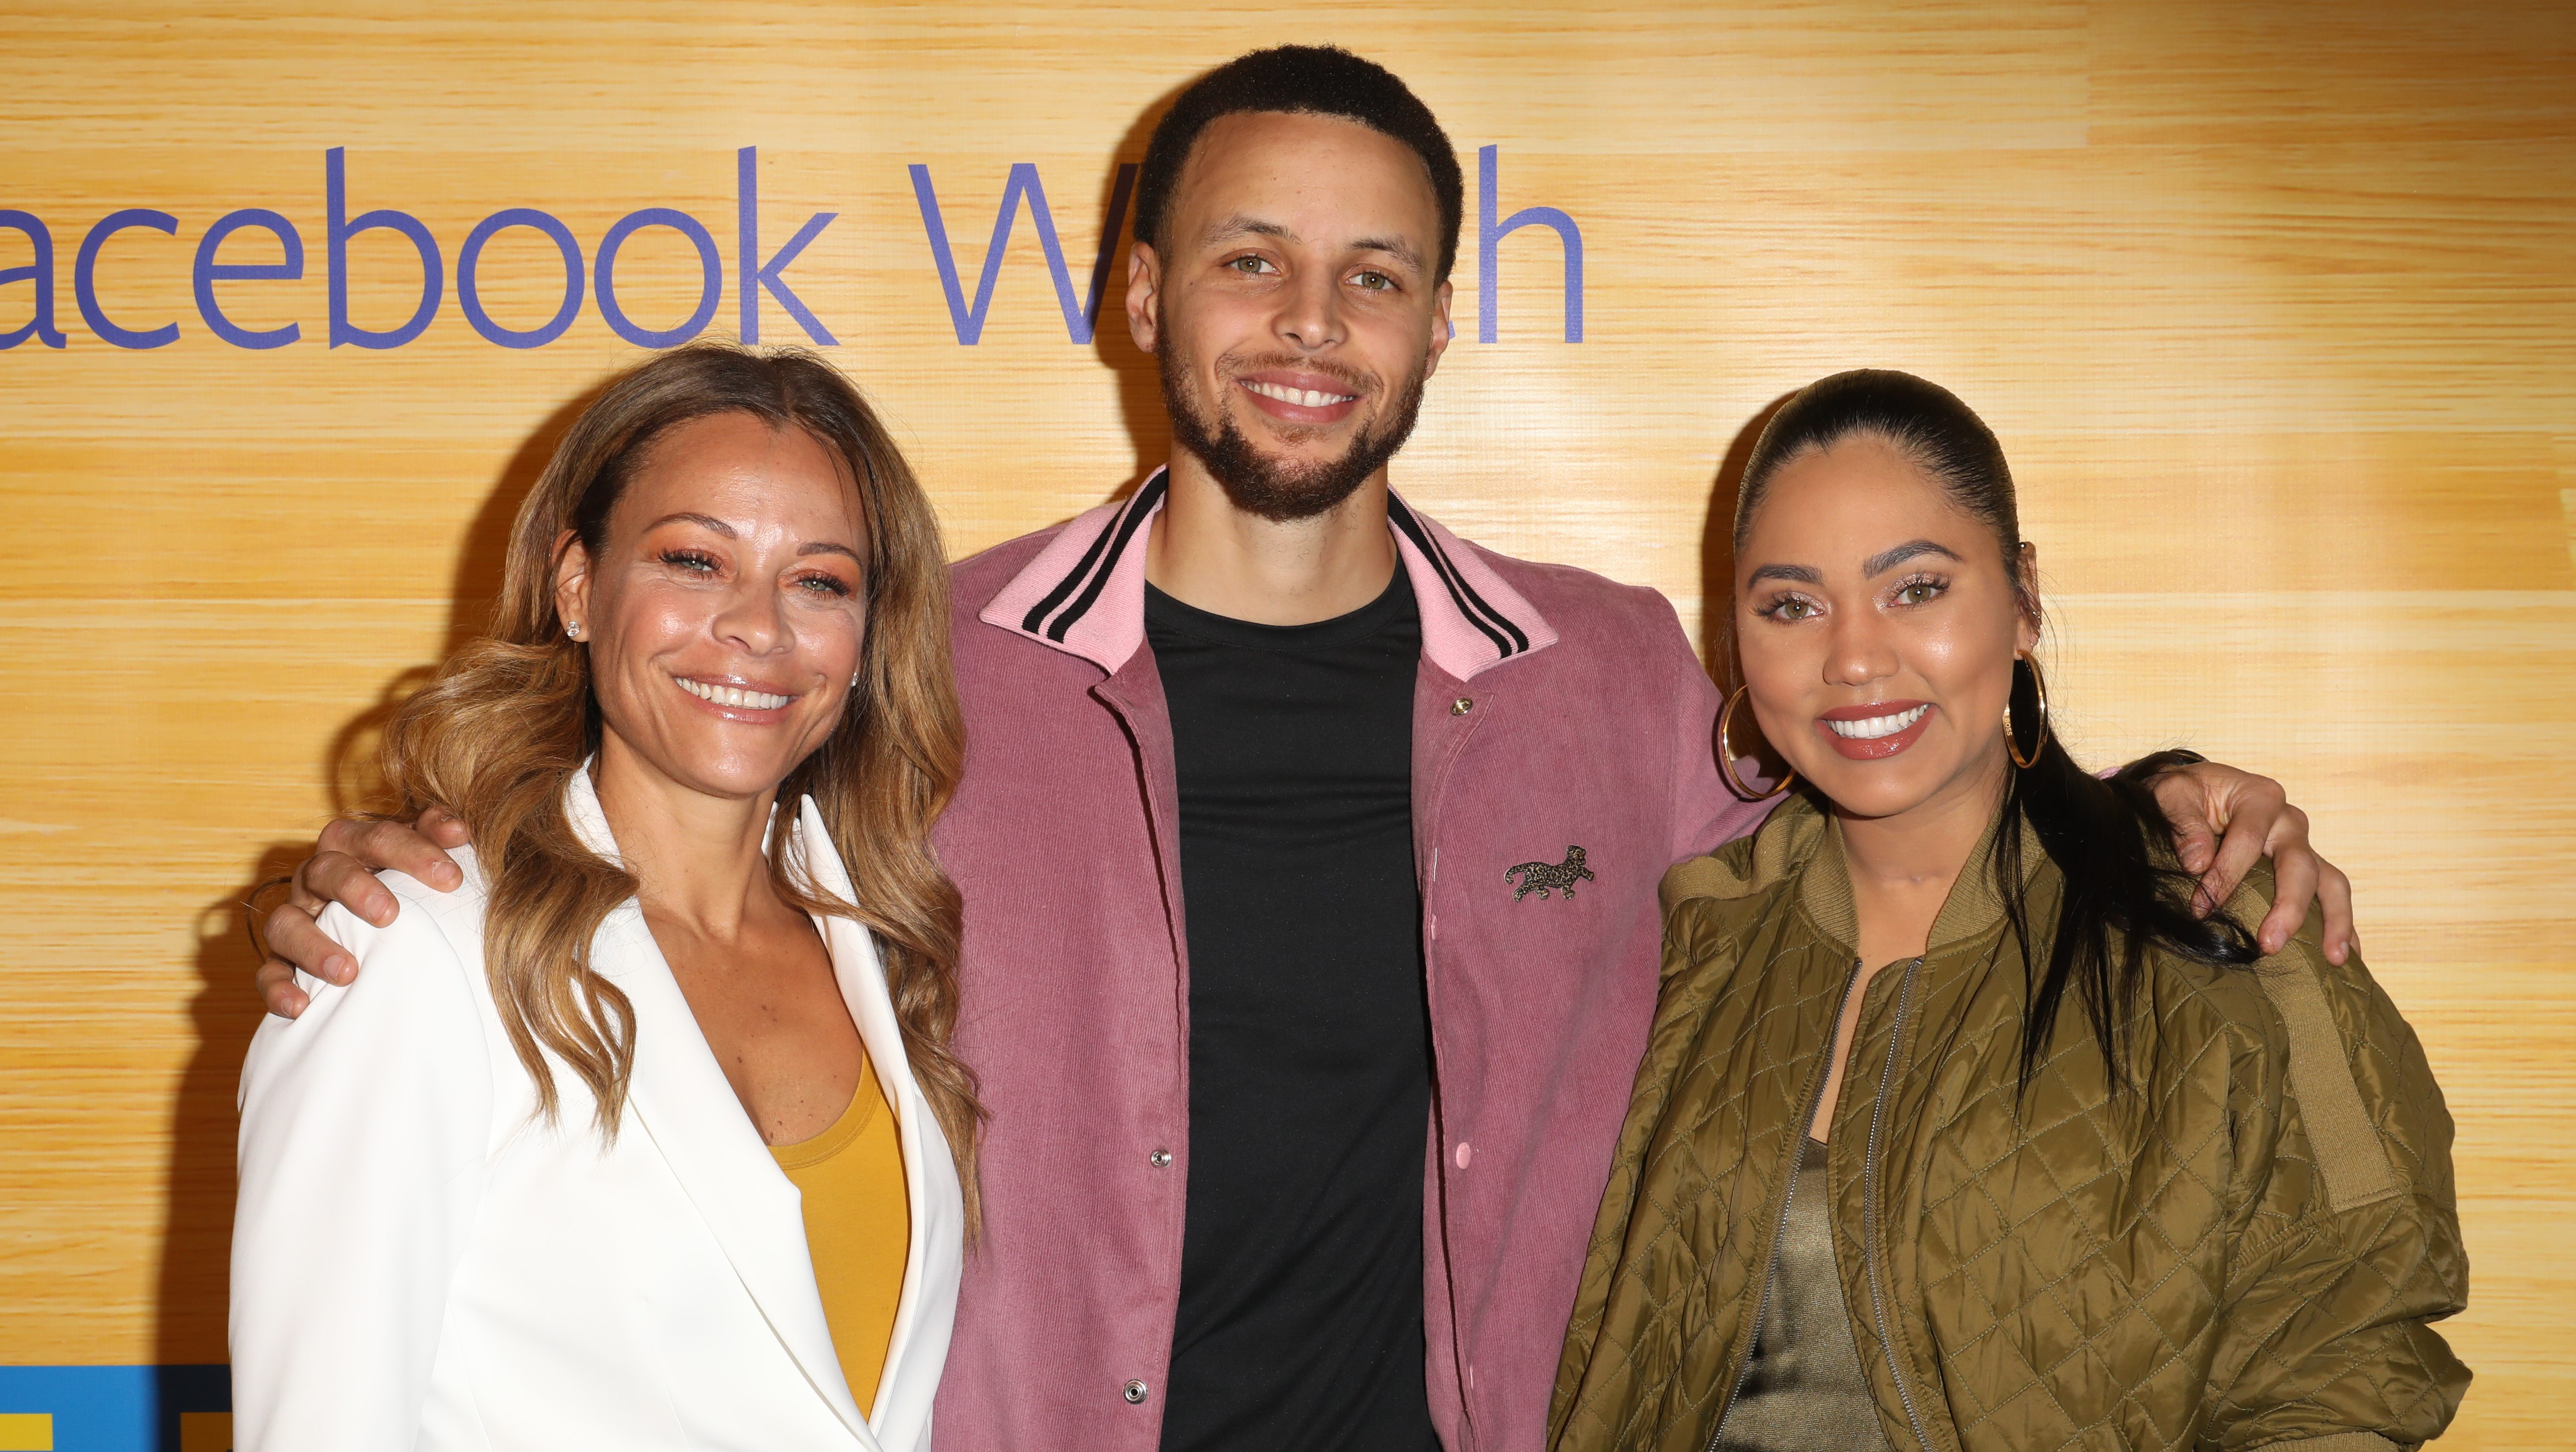 Sonya & Dell Curry, Steph's Parents: 5 Fast Facts